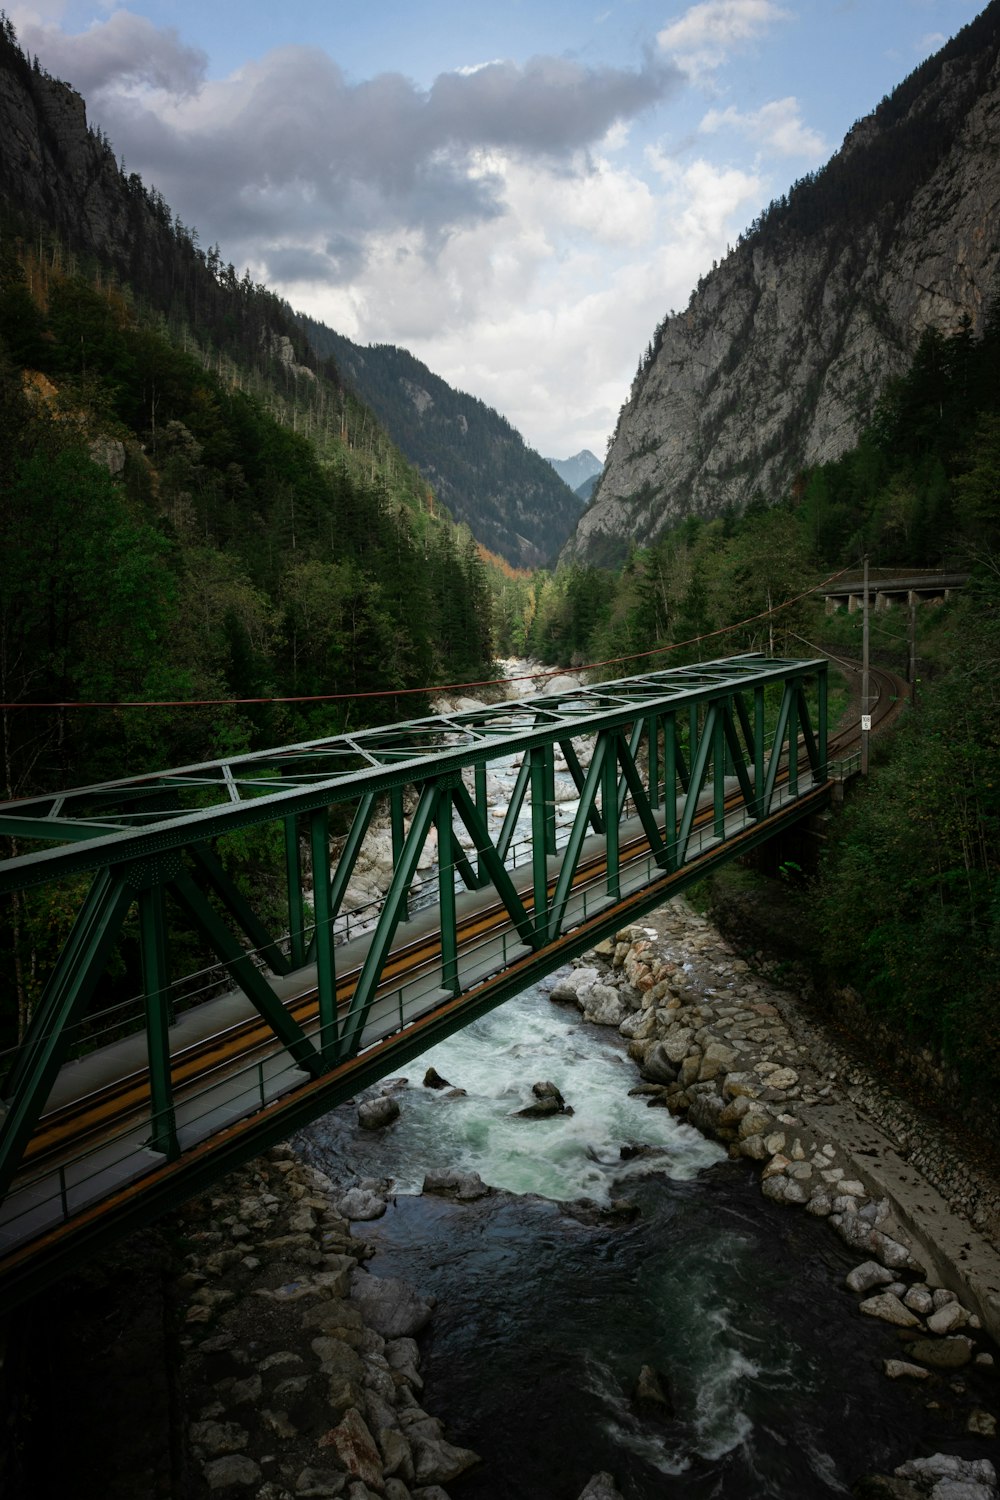 a bridge over a river with mountains in the background